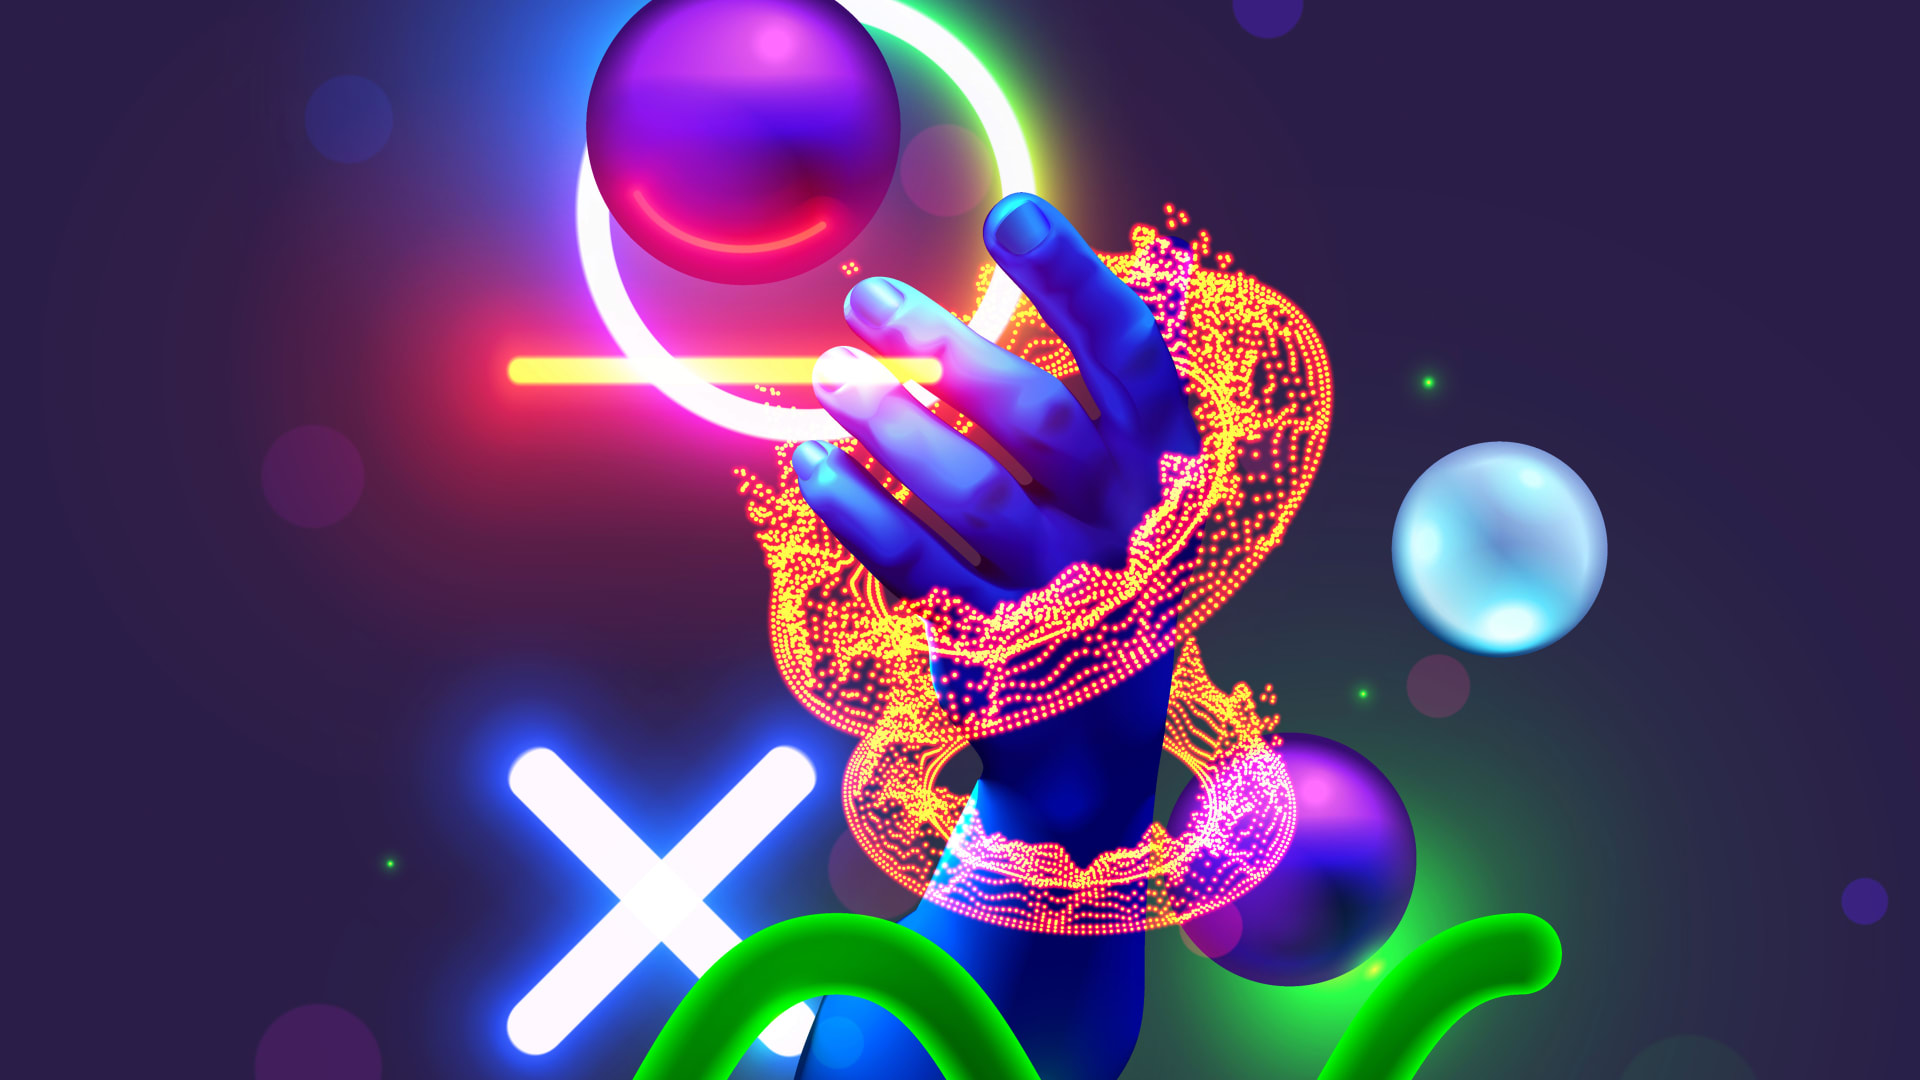 Hand surrounded by colourful abstract shapes